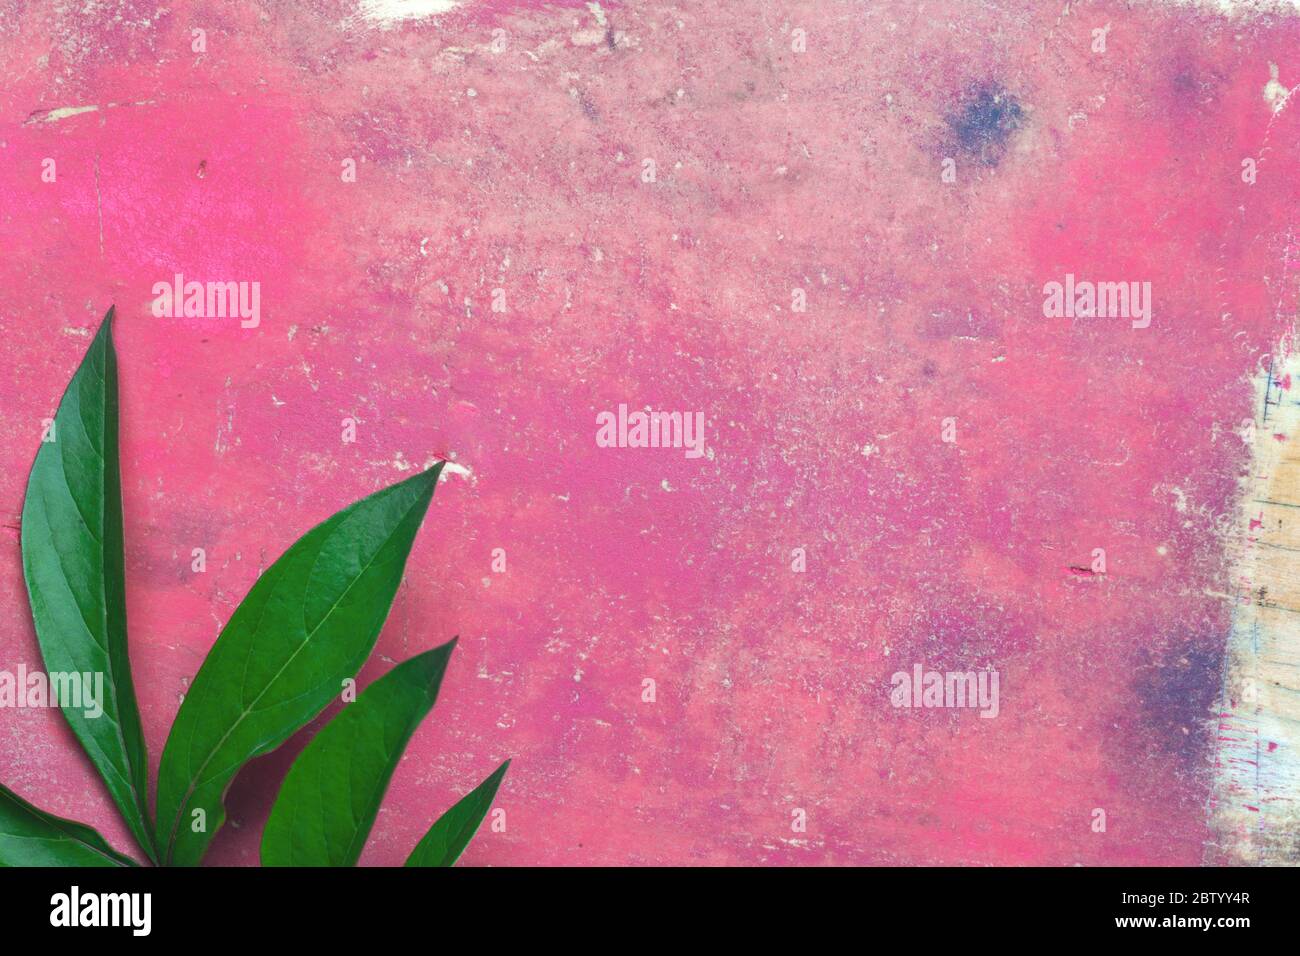 Old vintage grunge background. Wooden wall with peeling pink paint and green peony leaves in the corner Stock Photo